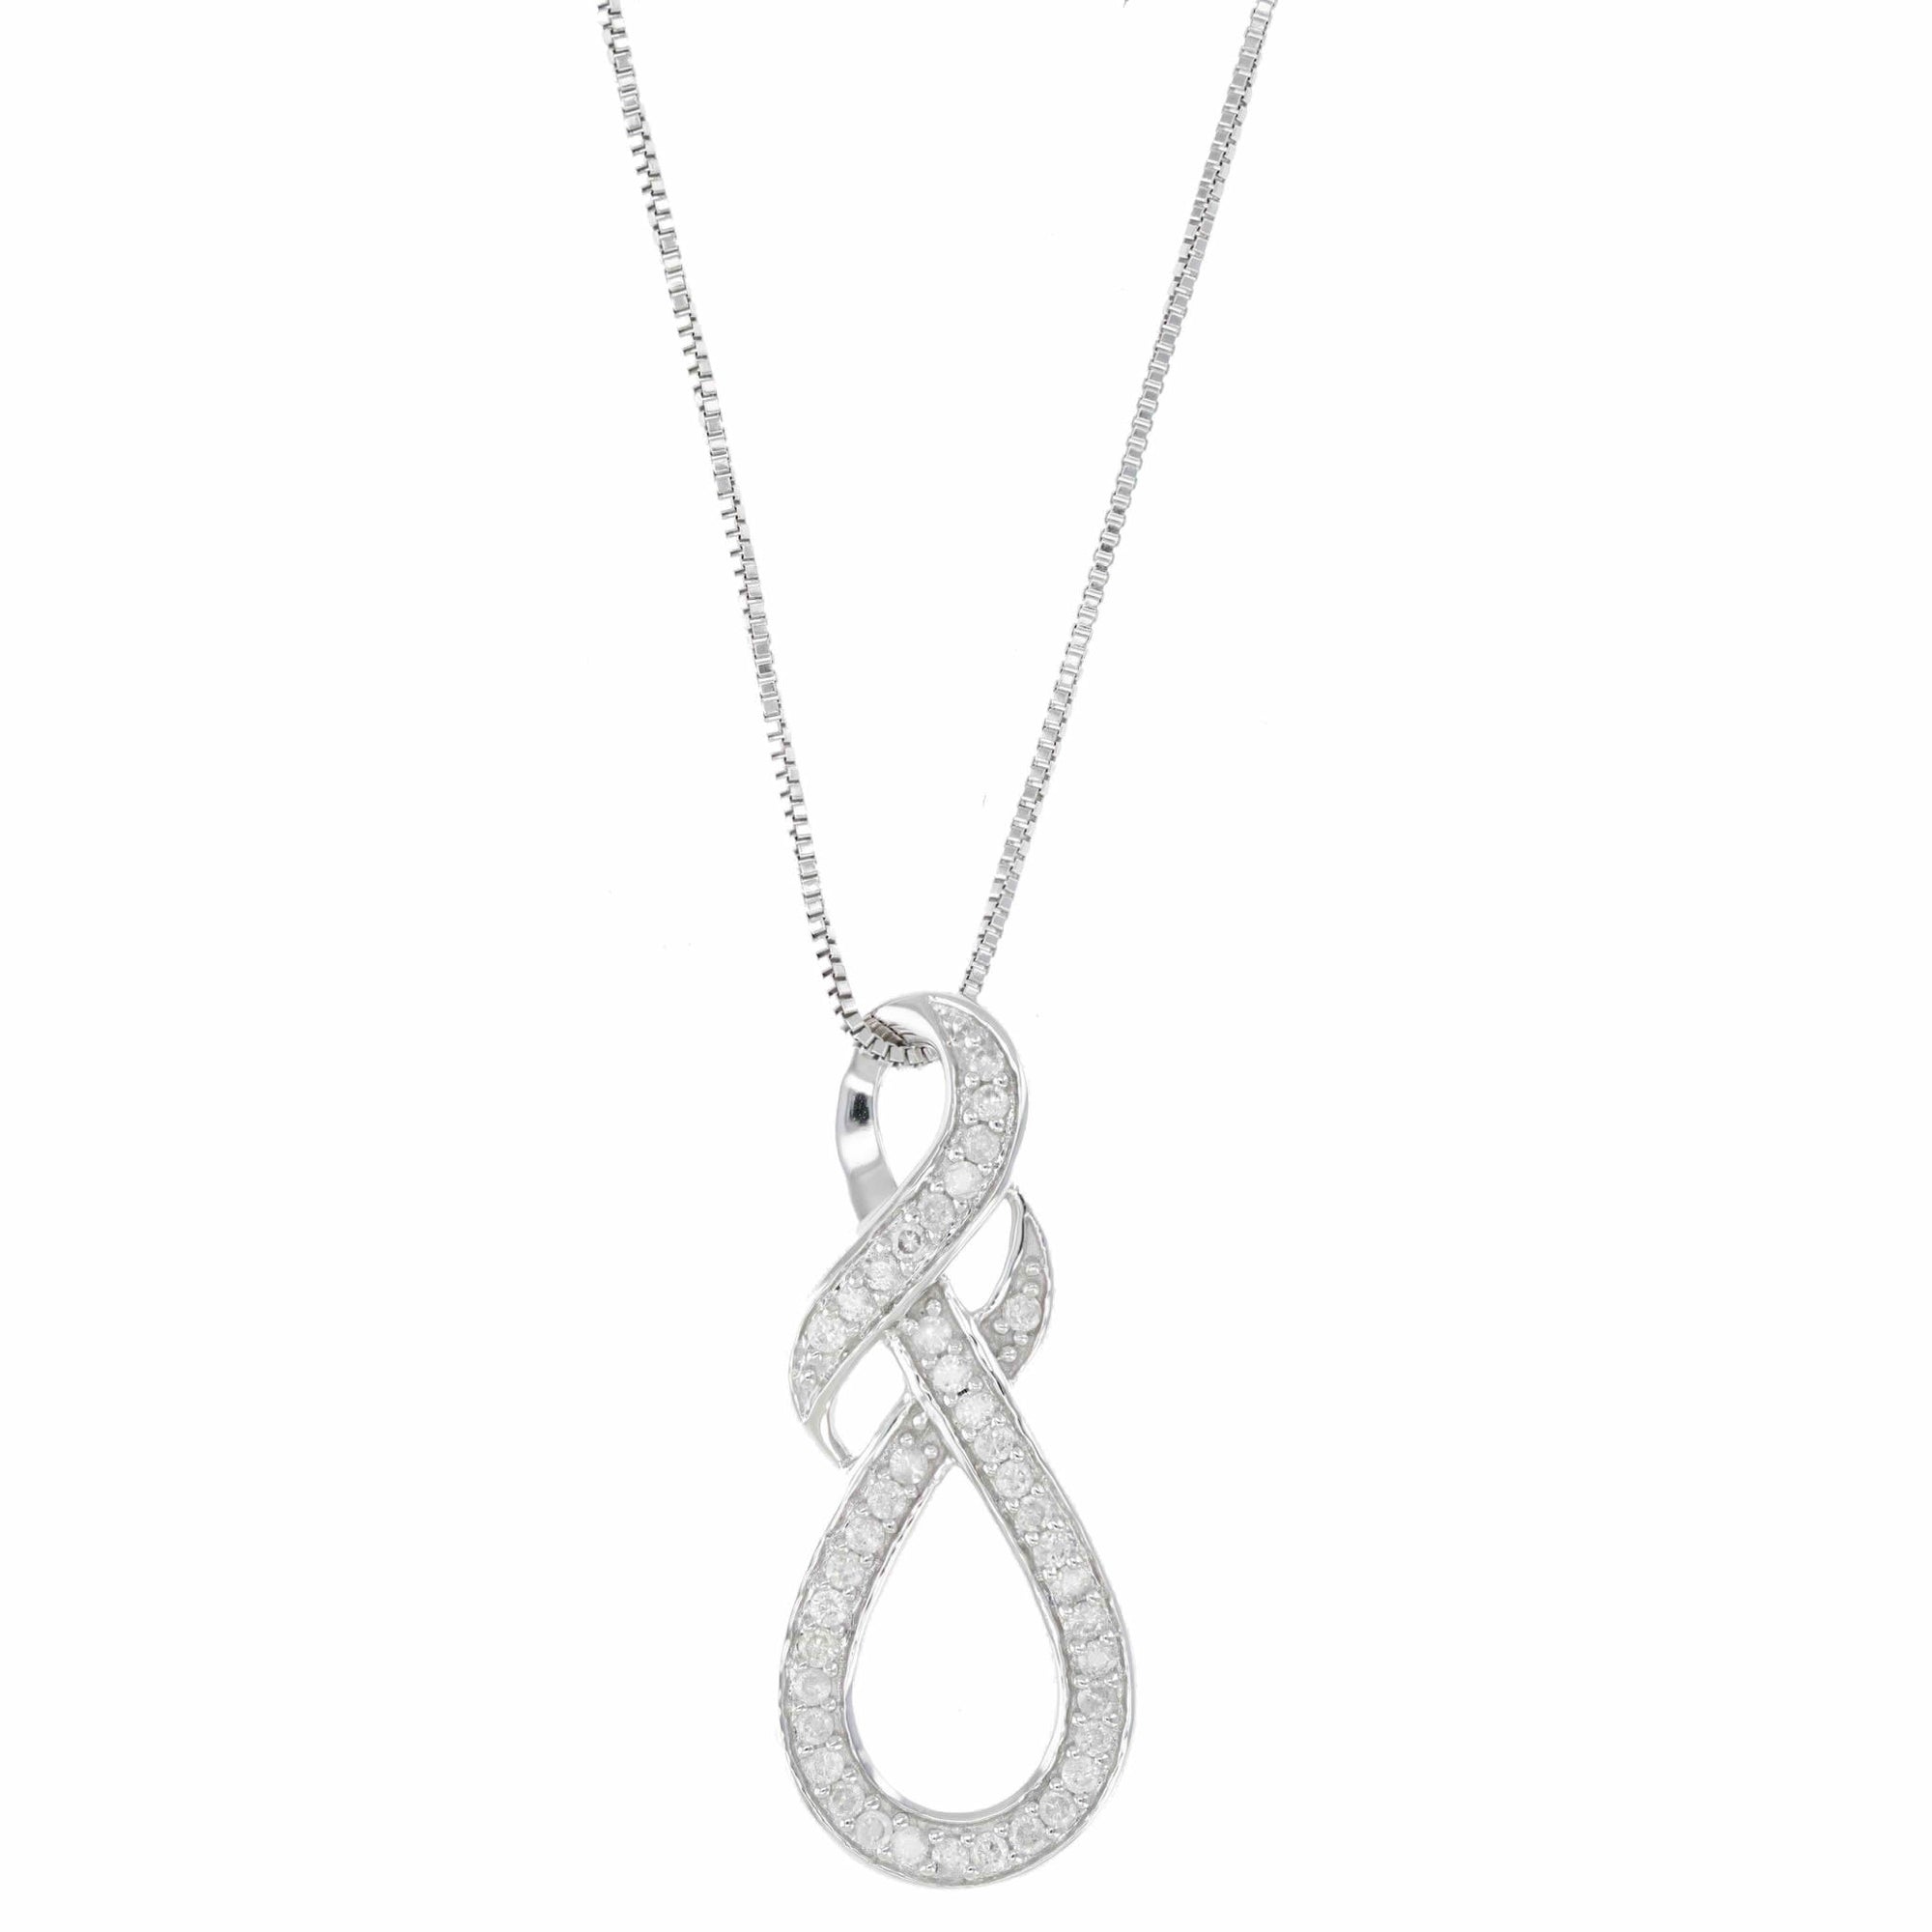 1/5 cttw Diamond Pendant, Diamond Swirl Infinity Pendant Necklace for Women in 10K White Gold with 18 Inch Chain, Prong Setting